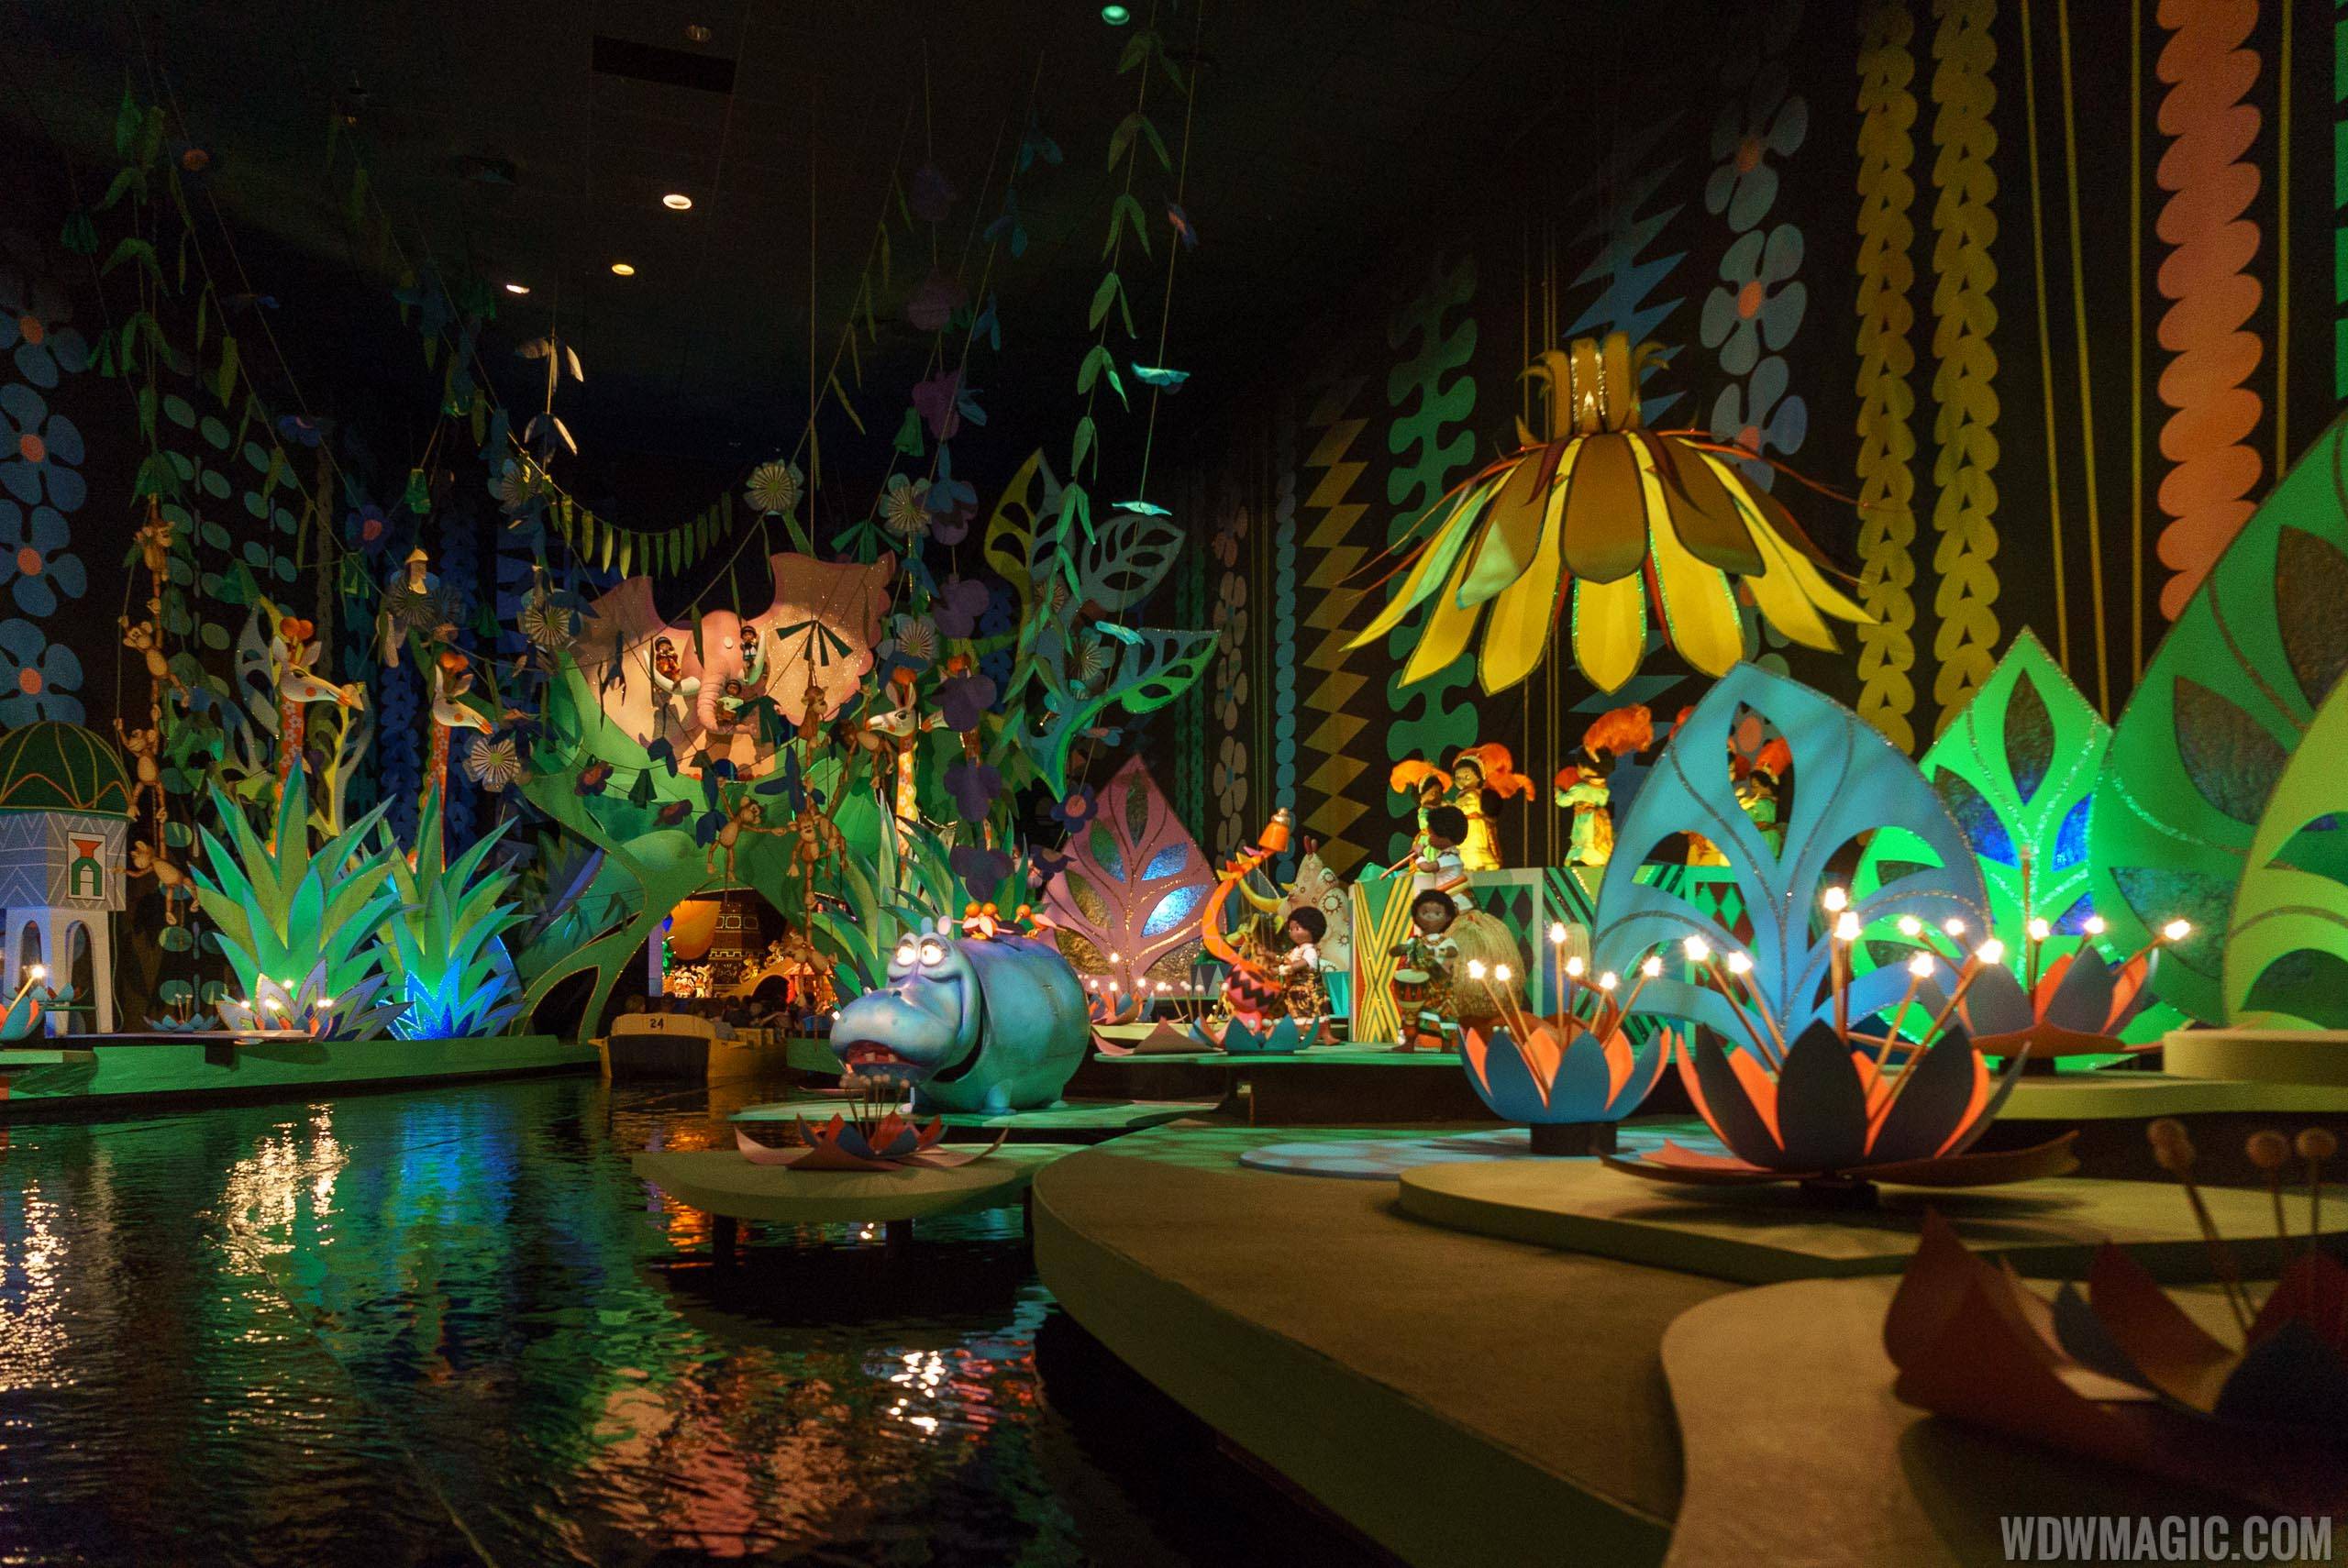 'it's a small world' closing for short refurbishment in late July 2021